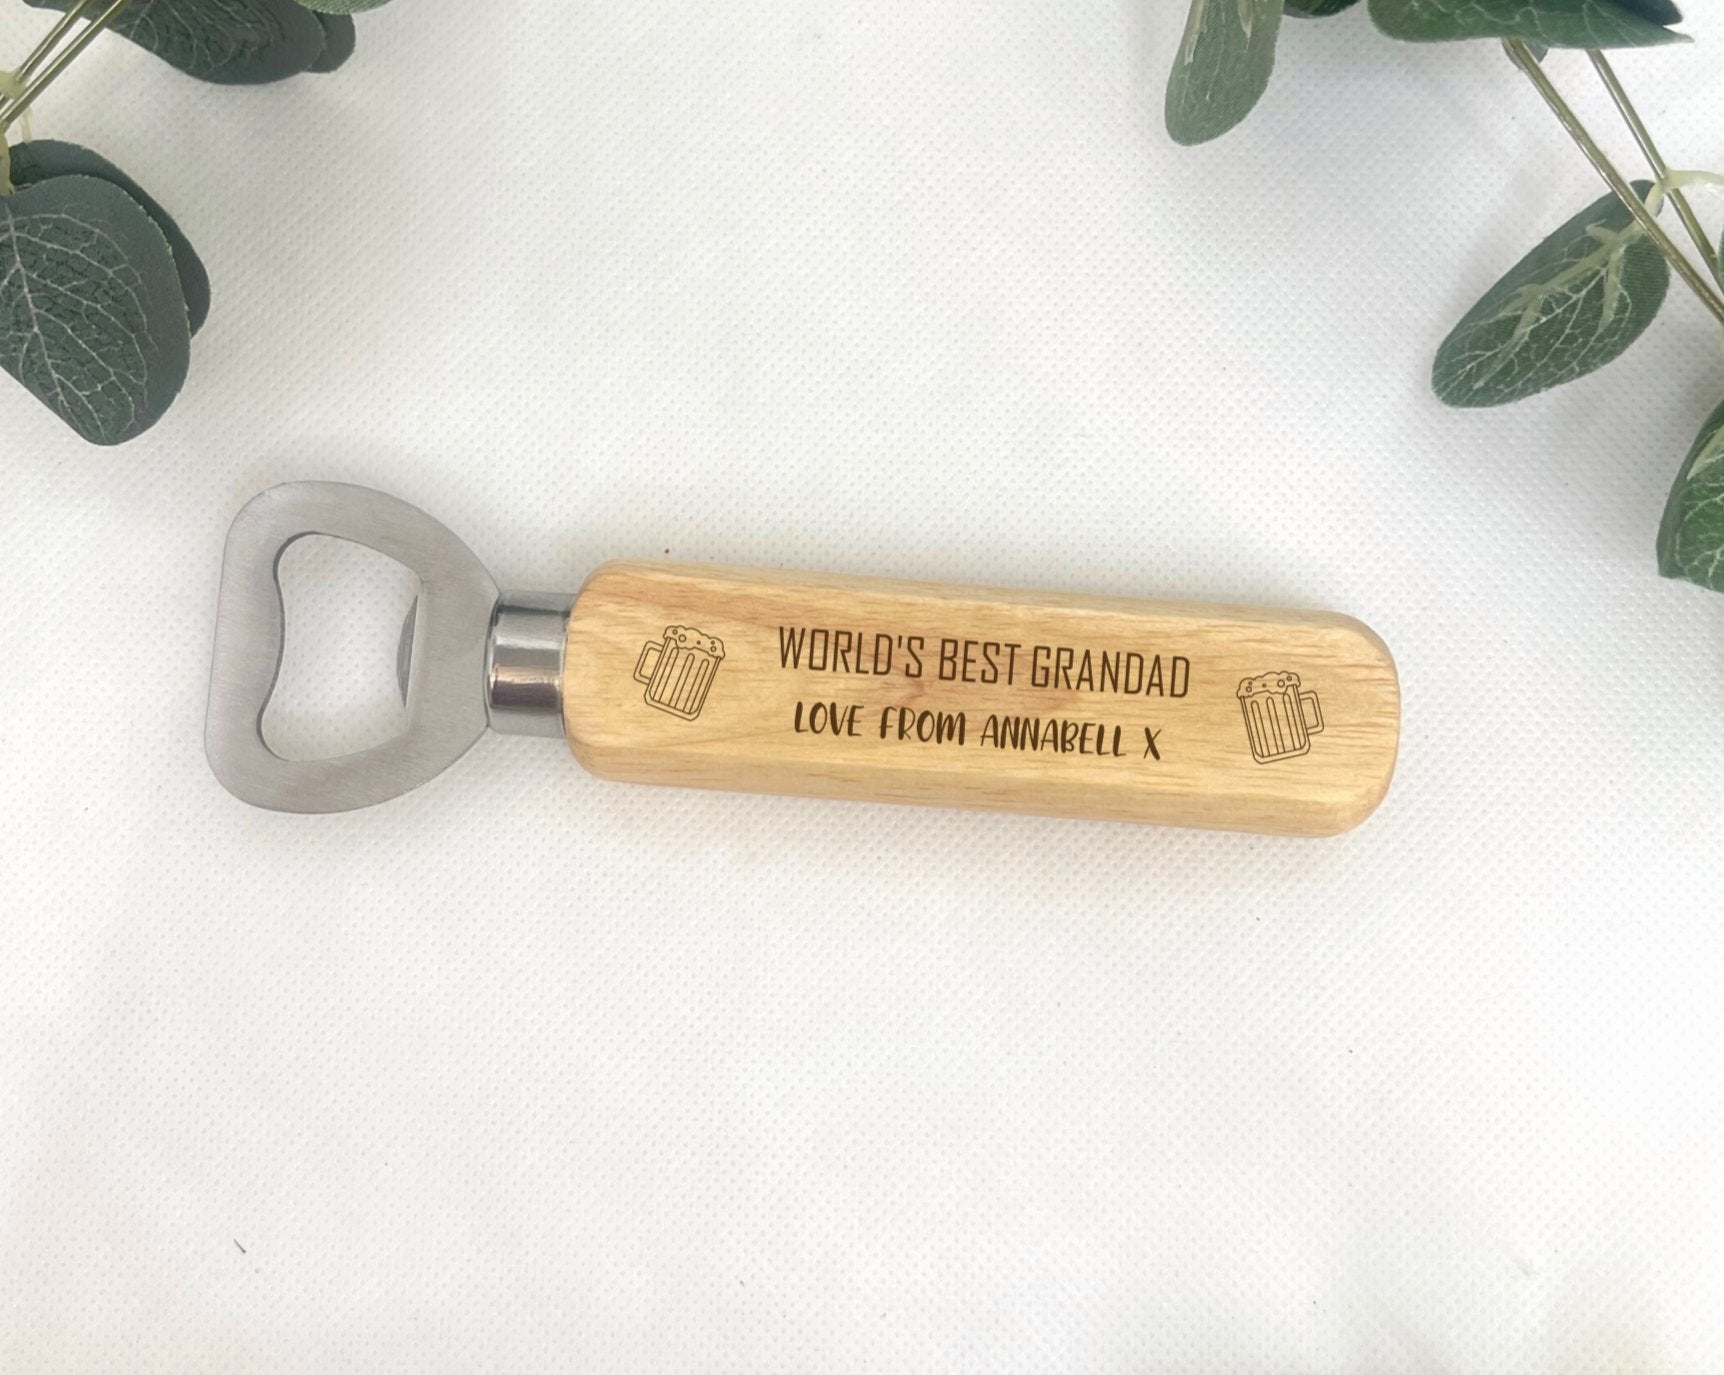 Personalised Wooden Bottle Opener - Handcrafted from top-quality wood and stainless steel - Customisable 'World's Best' engraving - Add a heartfelt 'love from' message - Charming beer jug icon - The perfect gift for Dad, Uncle, Grandfather, or any loved one.